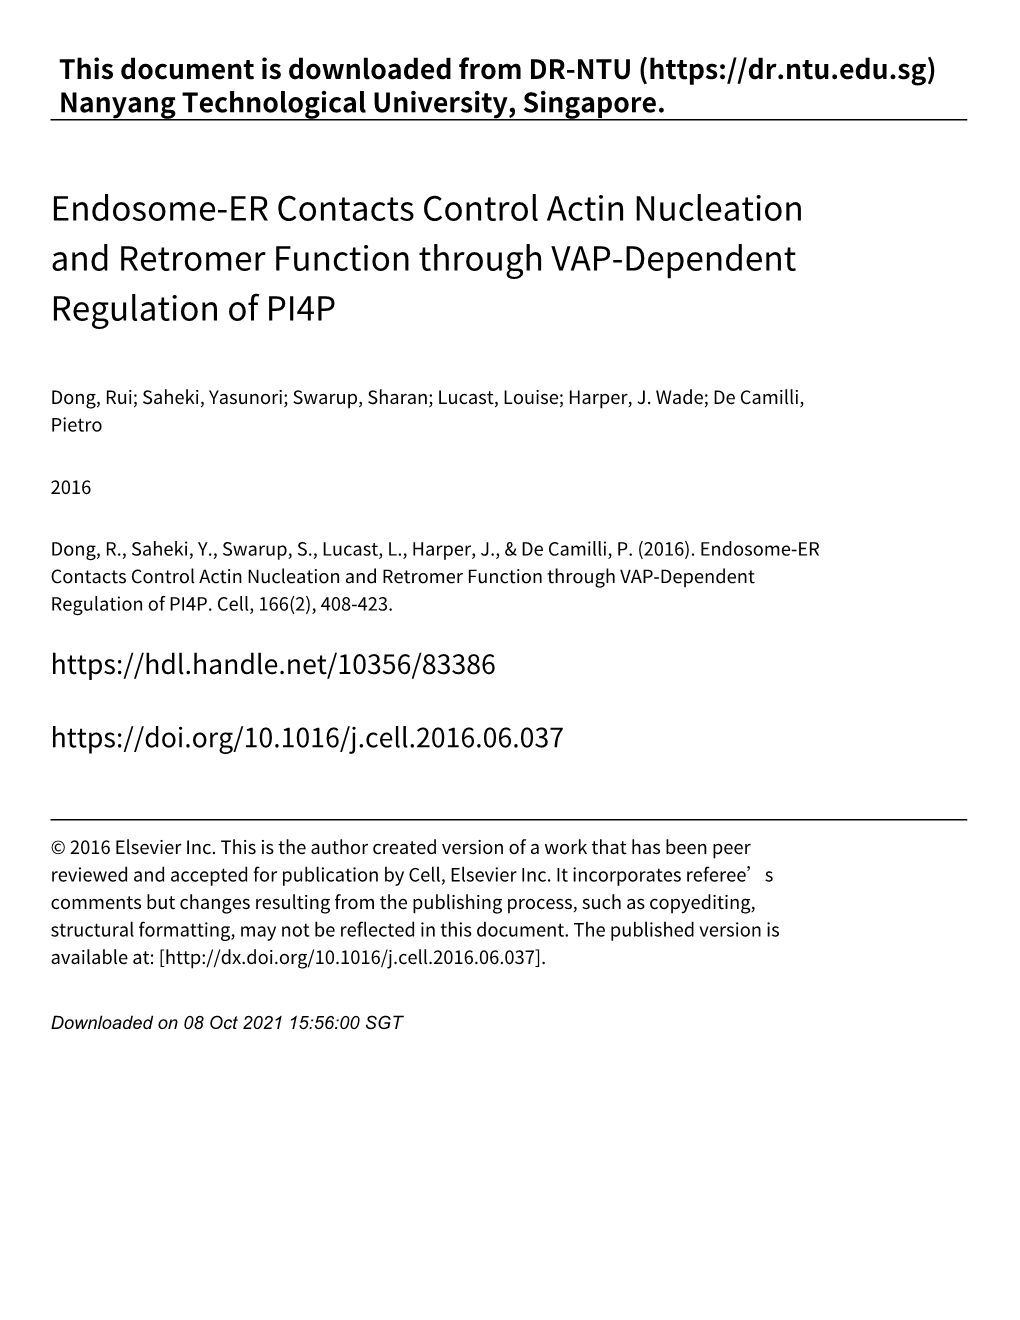 Endosome‑ER Contacts Control Actin Nucleation and Retromer Function Through VAP‑Dependent Regulation of PI4P